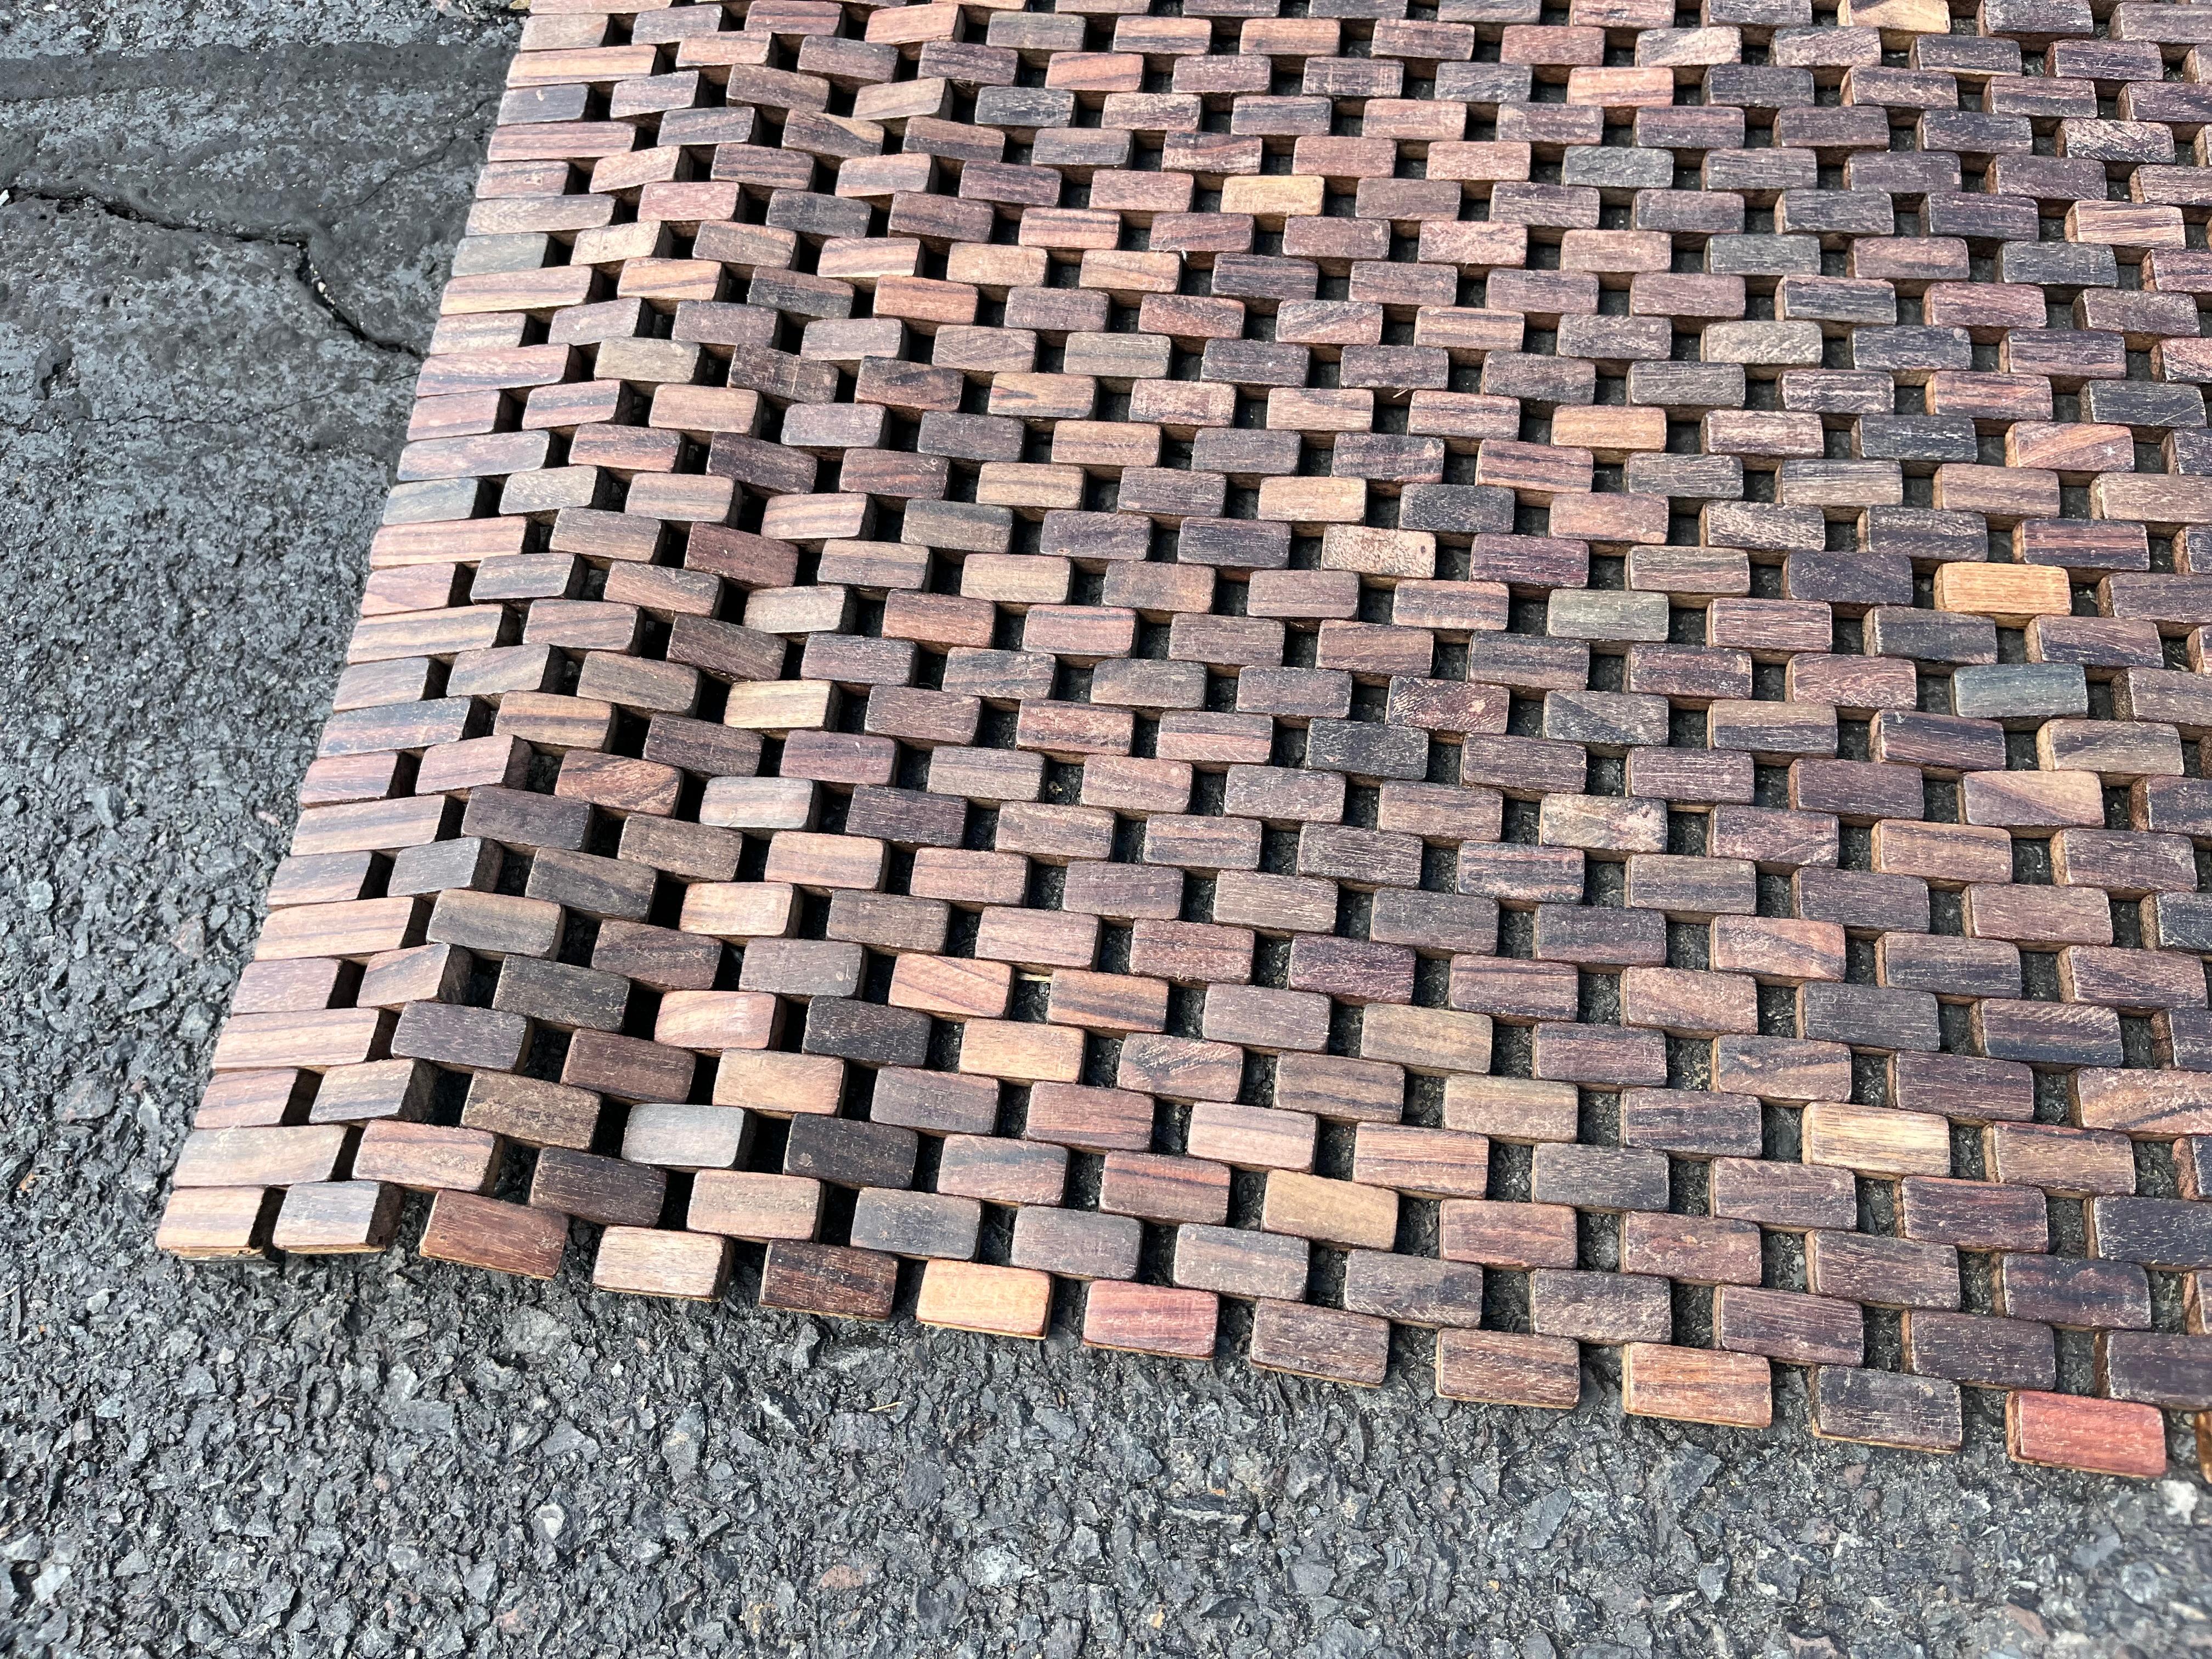 An unusual floor covering made from thousands of tiny teak blocks strung together with wire.